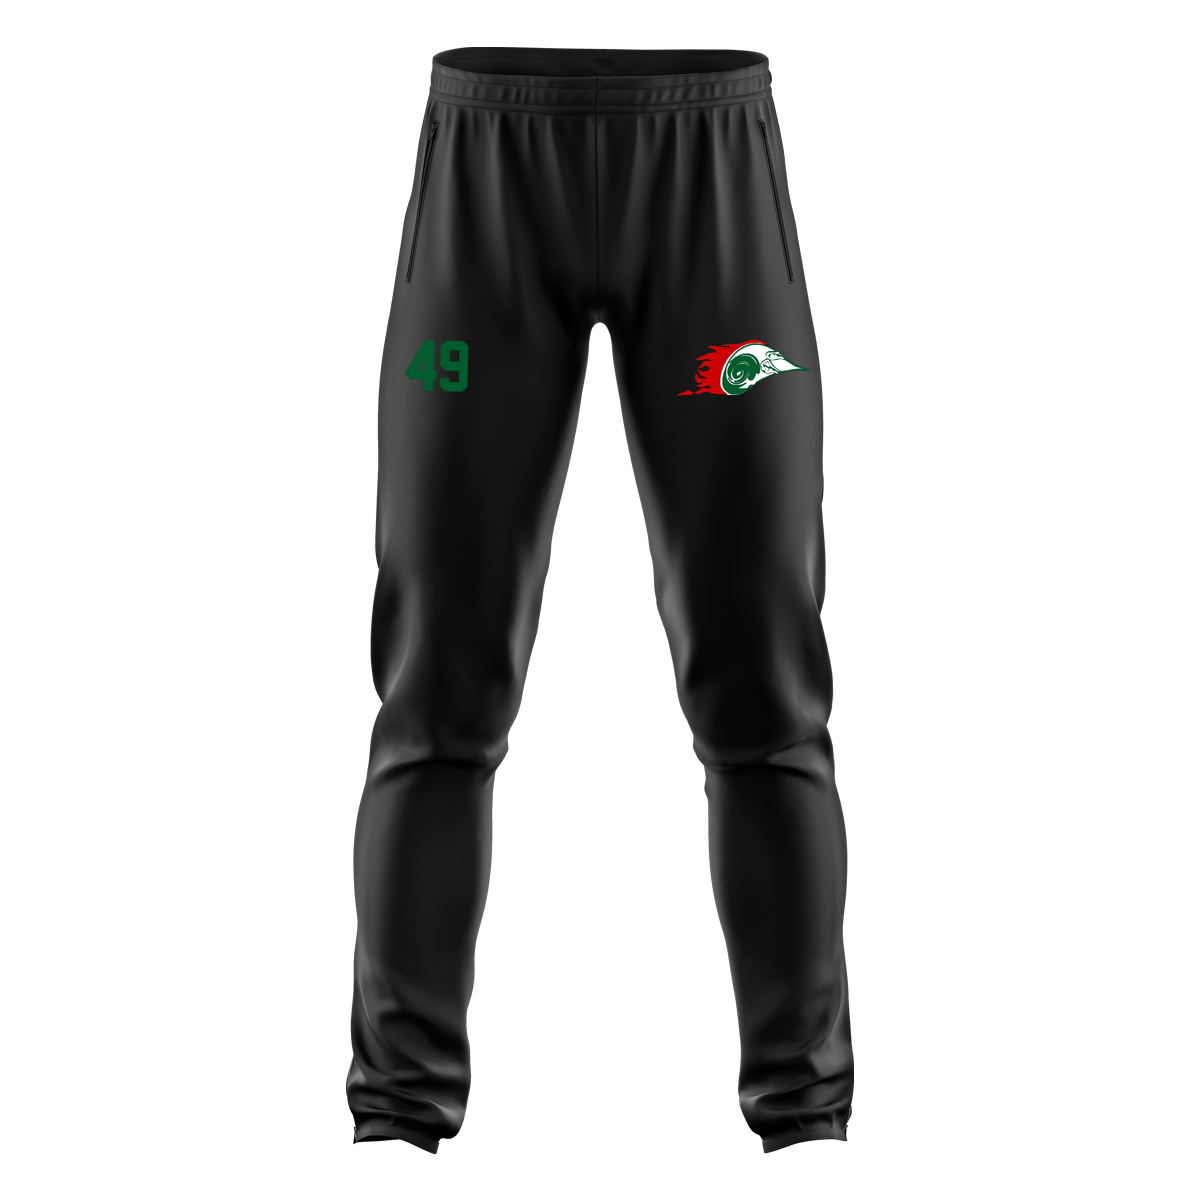 X-Press Leisure Pant with Playernumber/Initials